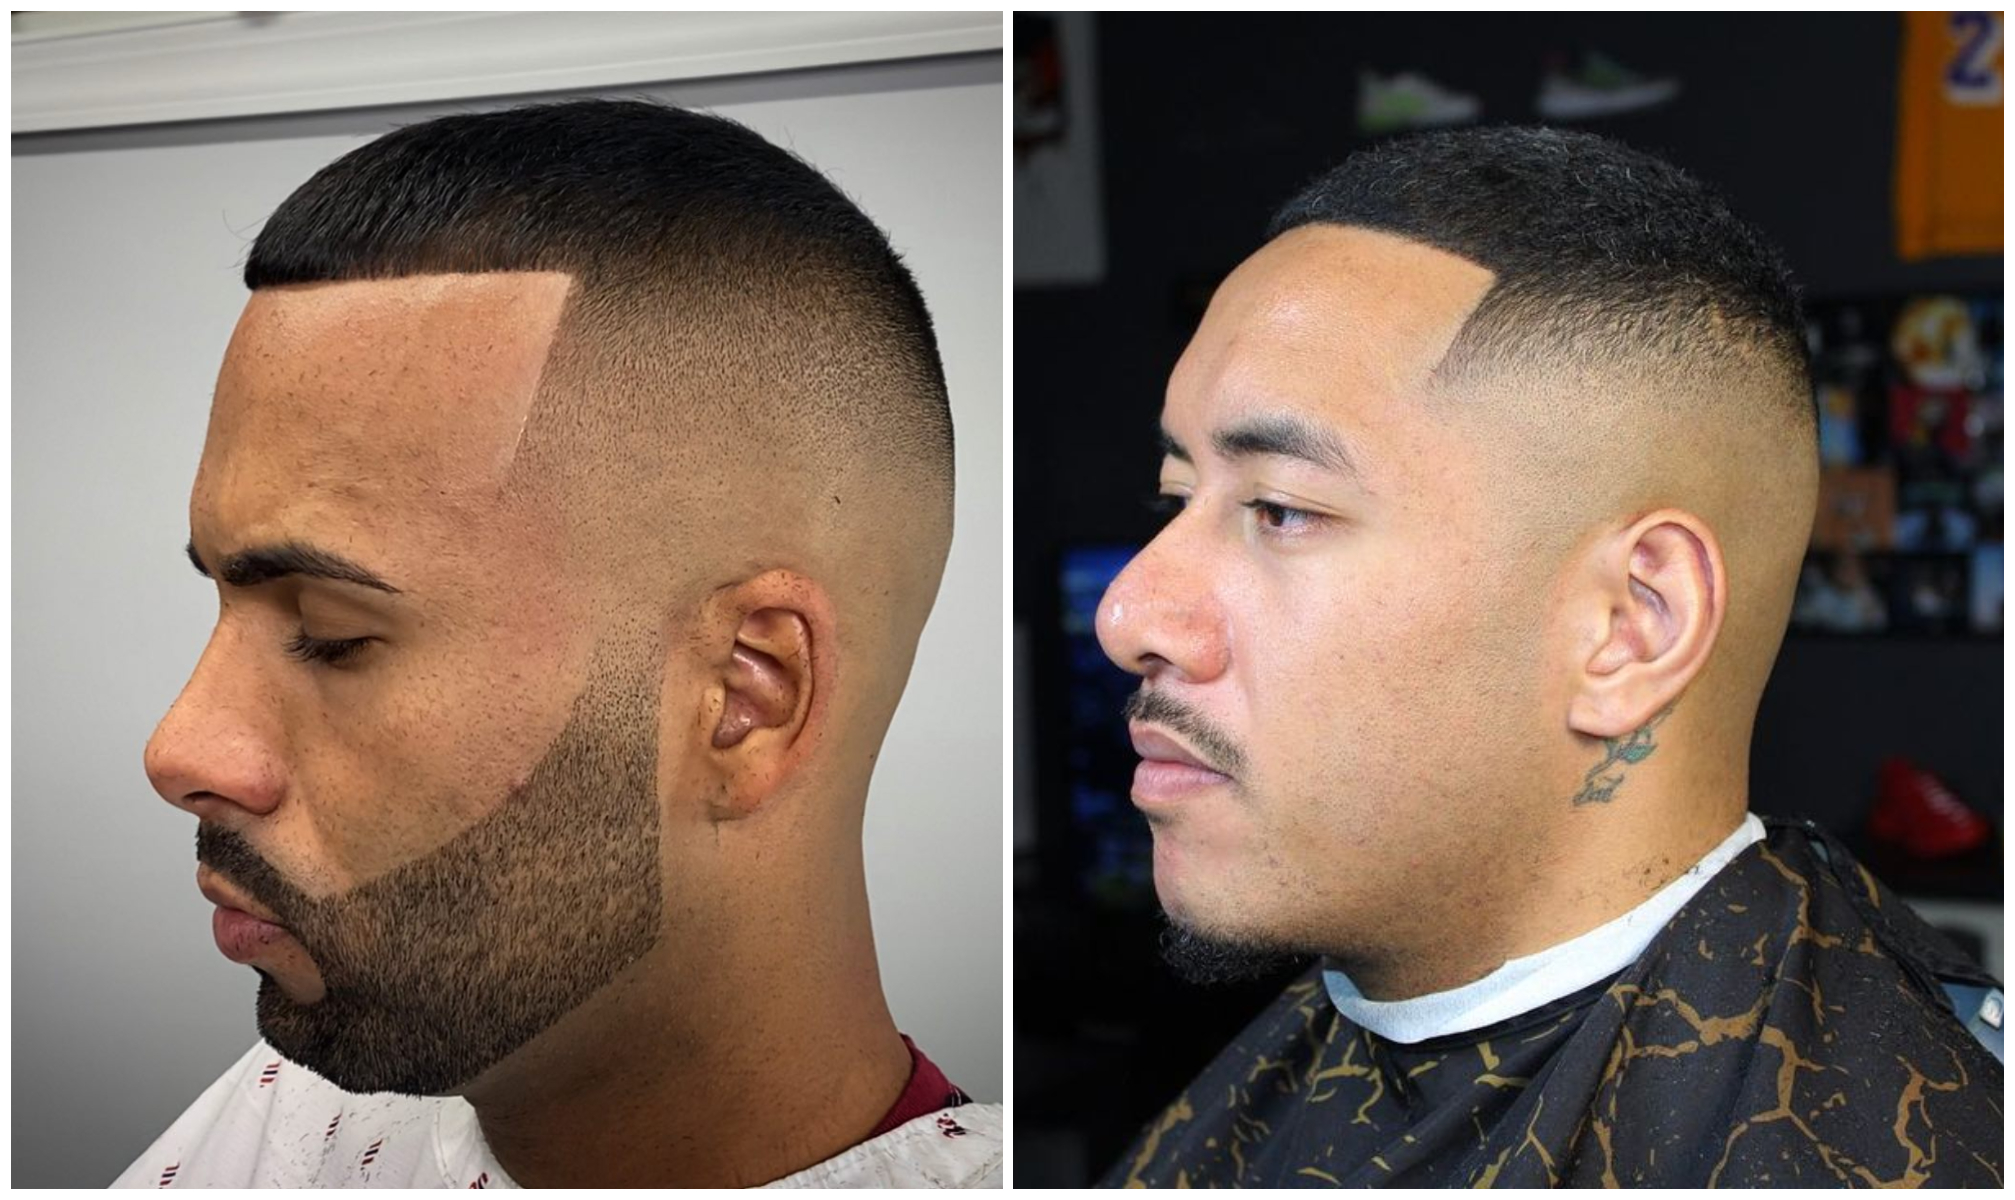 Types of fades for men